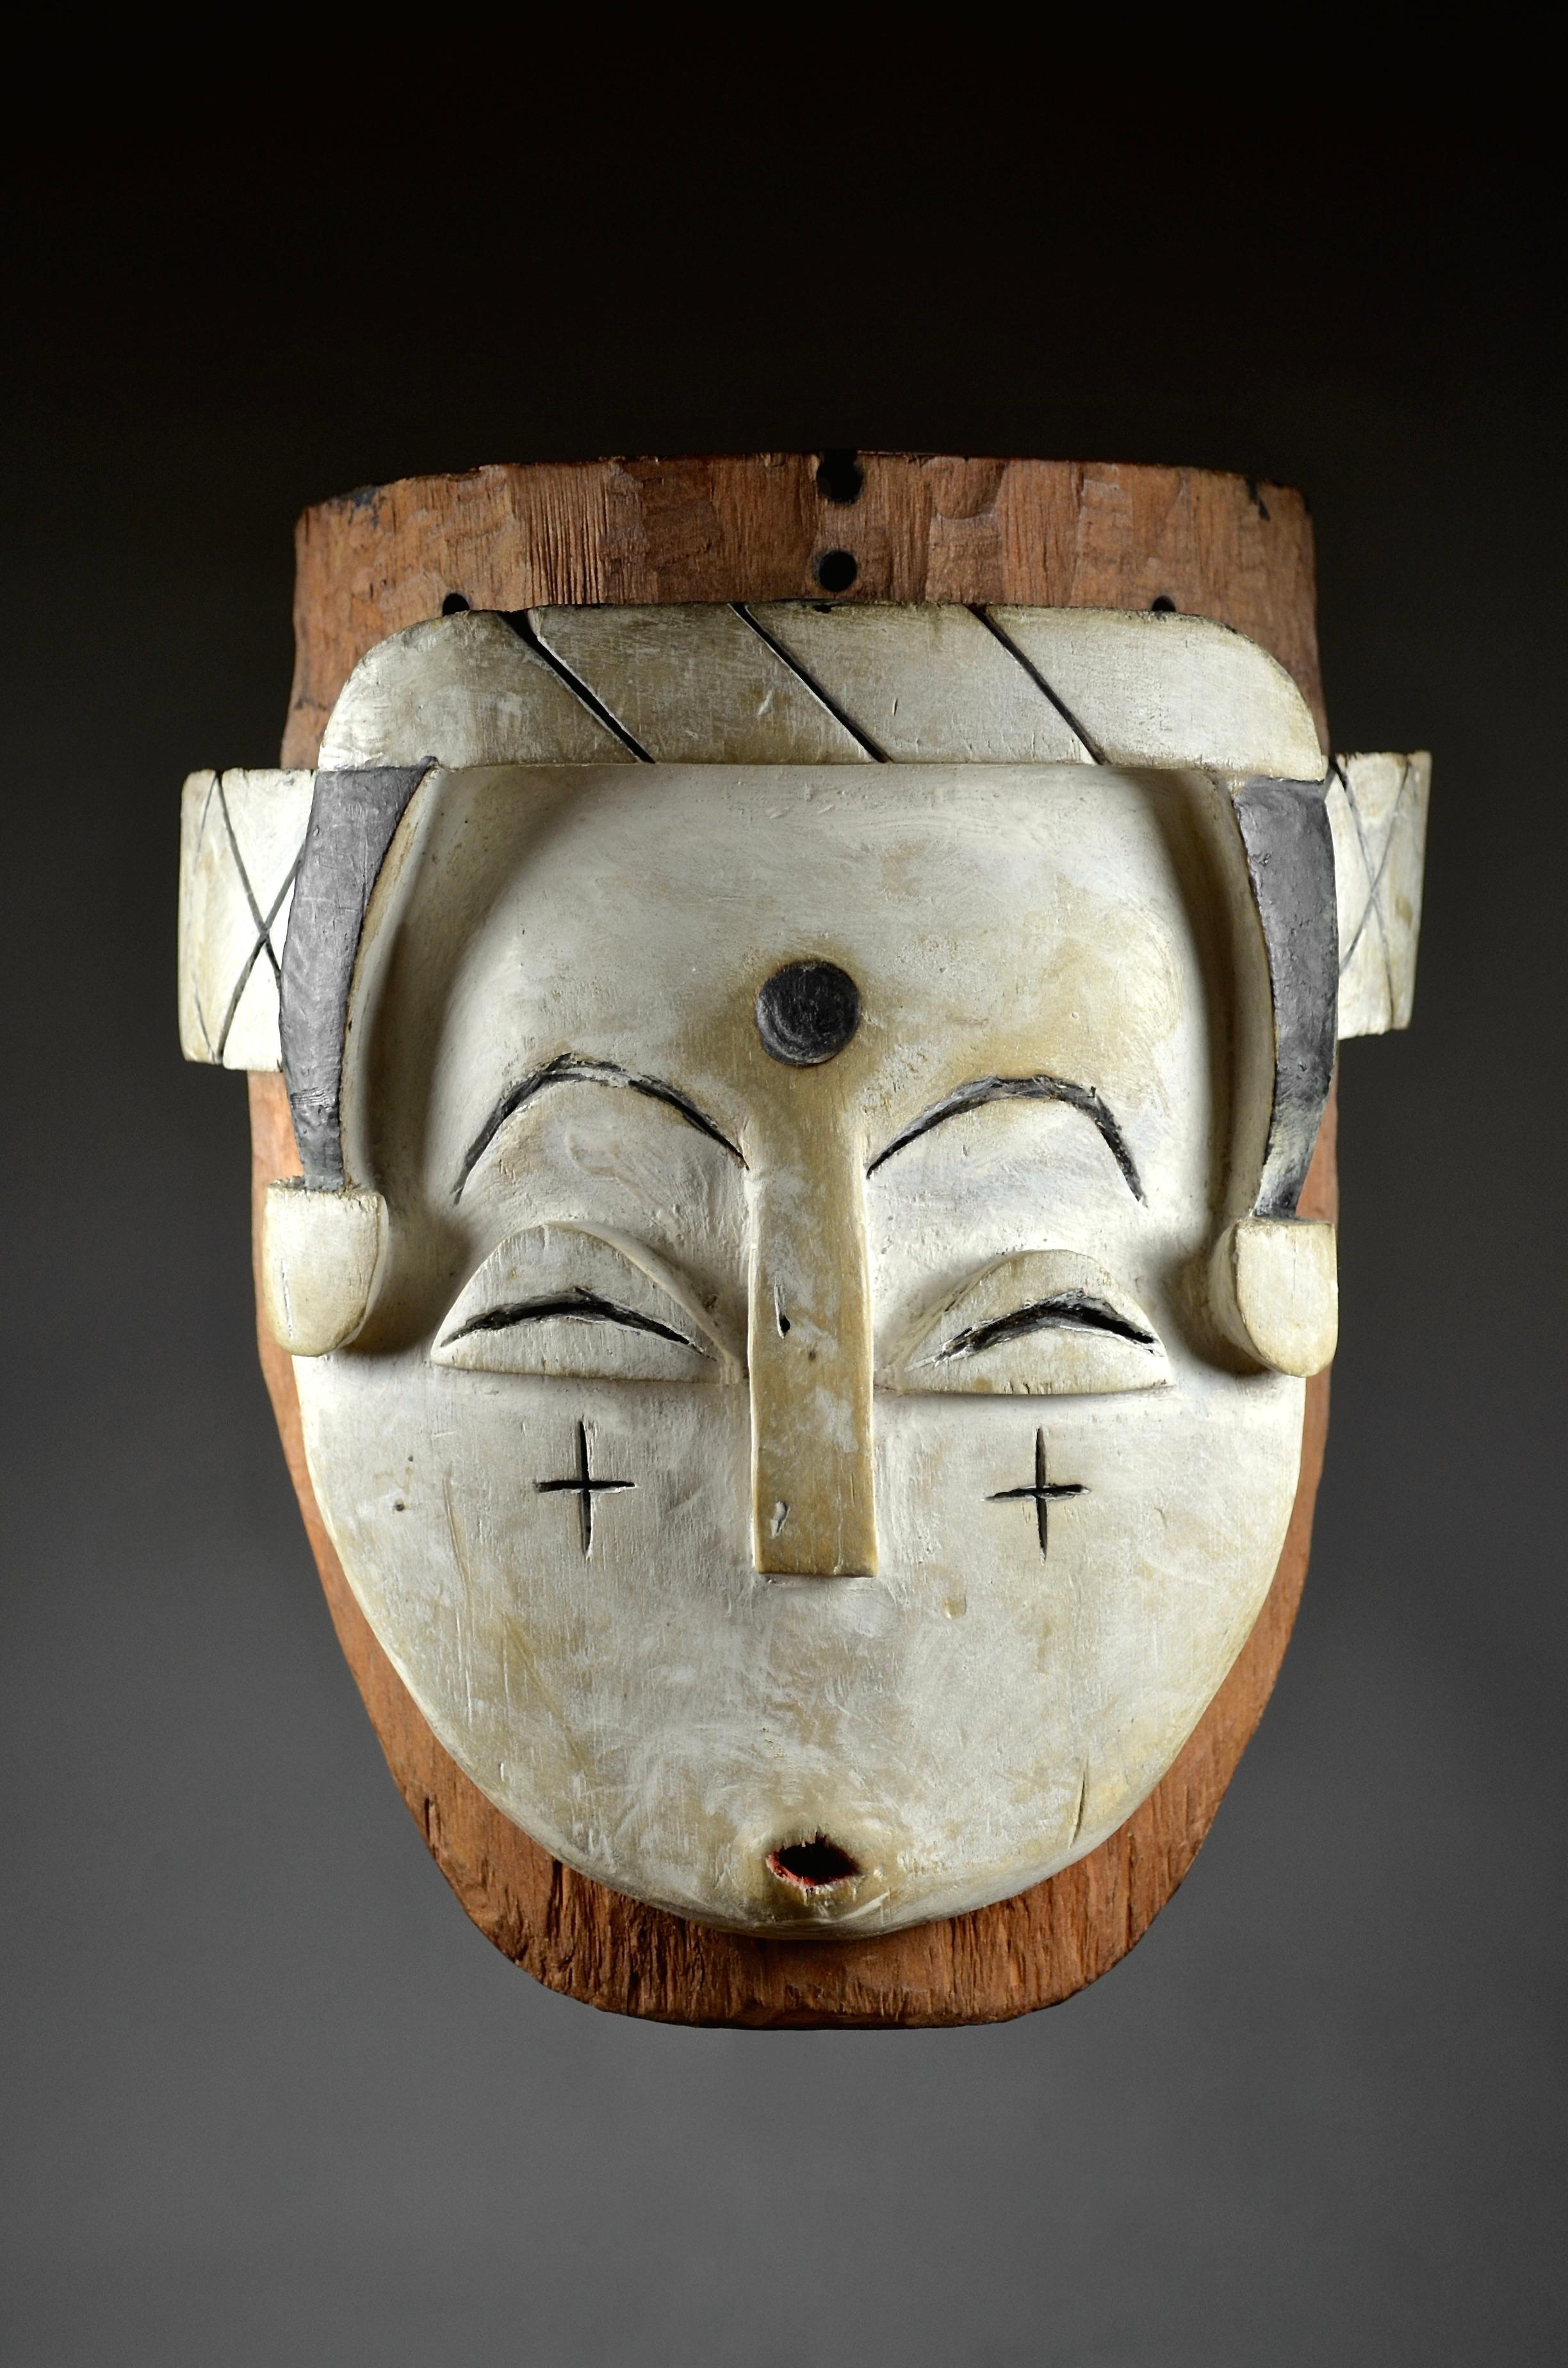 Ngontang Mask
Gabon
Fang-Kwele, (Vuvi)
Early 1900s
Height: 25cm

Material: 
- Wood, pigment, white kaolin

Provenance: 
- Ex collection Gaspereaux, Toulouse, France
- Zemanek Munster, Germany
- Christopher Wild, UK

Published:
-